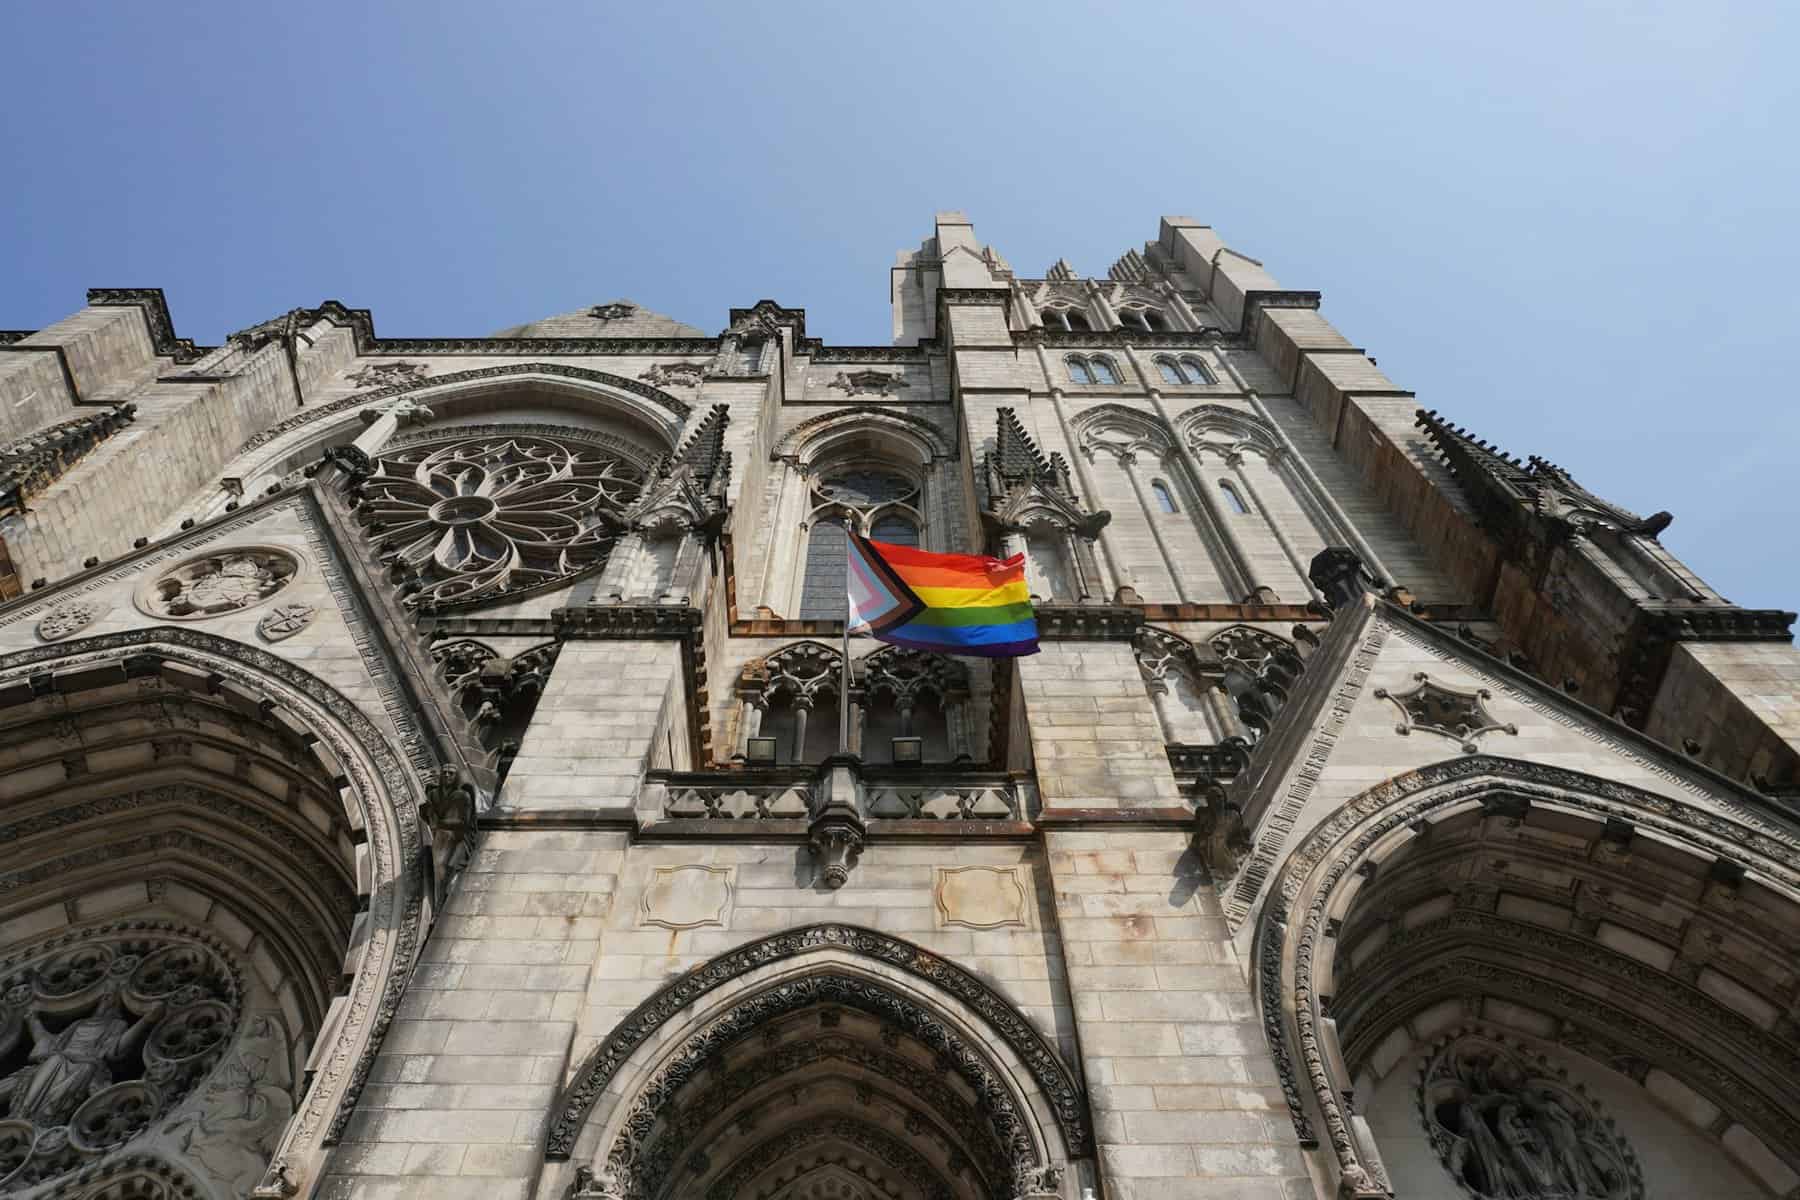 NYC Gothic church with a Pride flag in front.